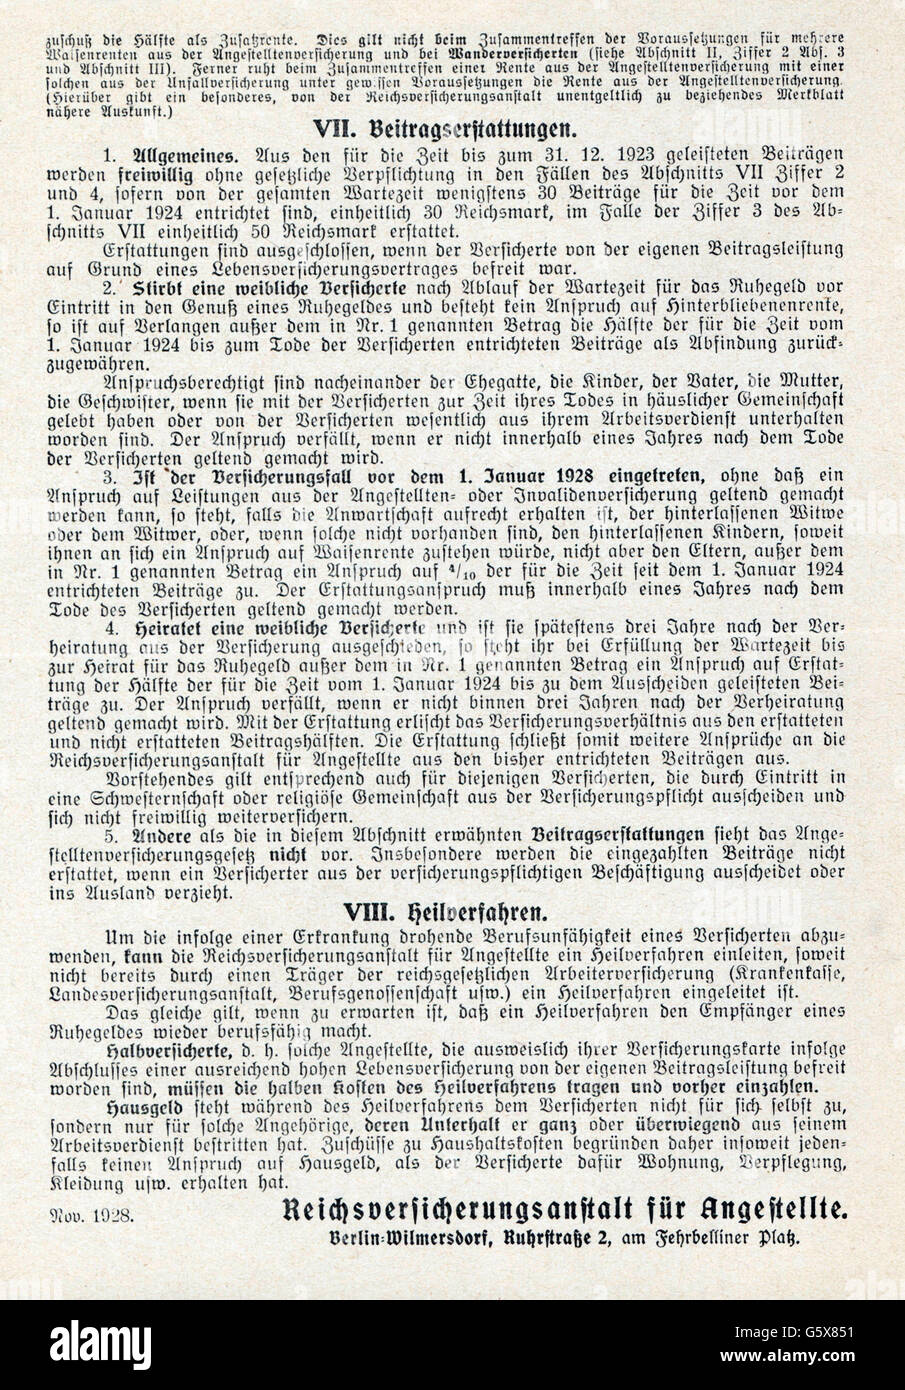 documents,official writing,instructions,instruction number 2,the benefits of the employment insurance,Reich insurance institution for employees,November 1928,page 4,insurances,social security,social insurance,social contribution Carrier,pension insurance fund,pension scheme,pension insurance scheme,retirement insurance,Germany,German Reich,Weimar Republic,1920s,20s,20th century,no-people,documents,document,writing,writings,leaflet,pamphlet,instructions,leaflets,pamphlets,number,numbers,attainment,attainments,employees,office,Additional-Rights-Clearences-Not Available Stock Photo